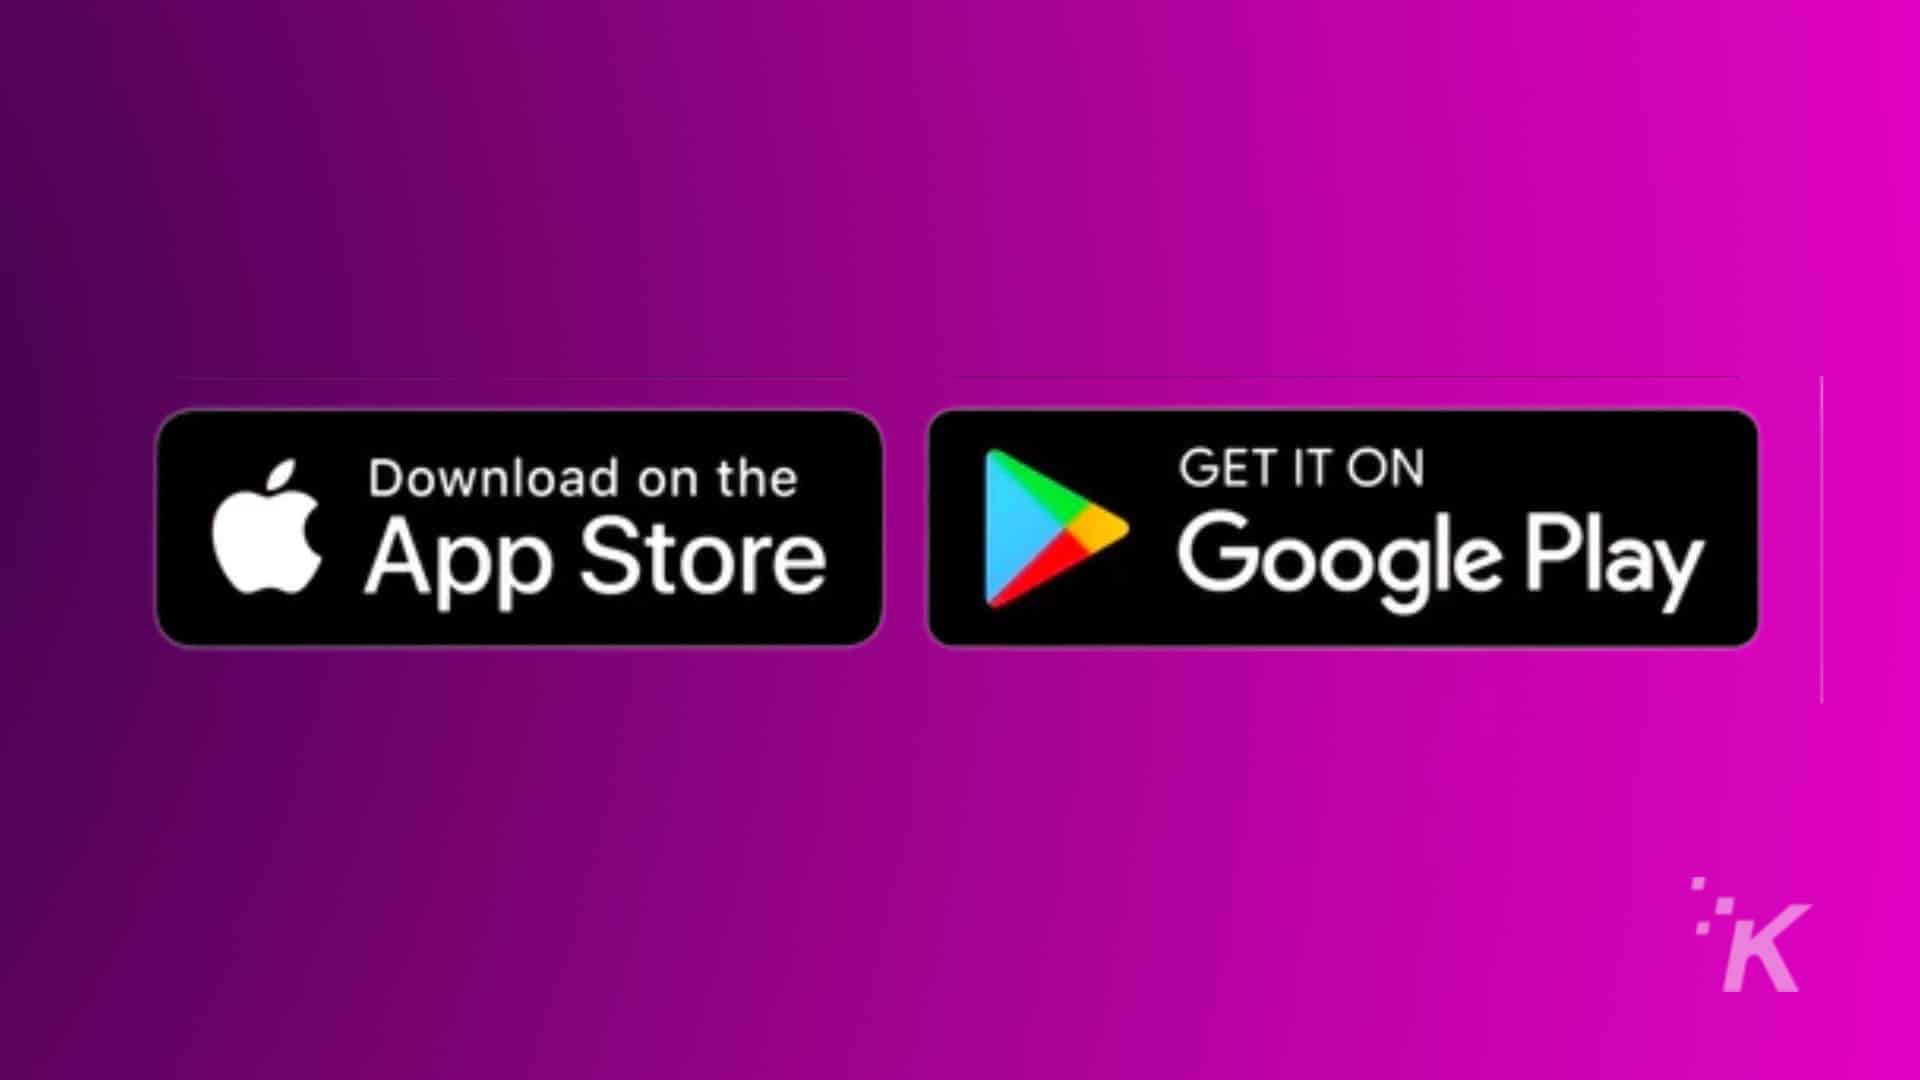 The image is promoting the availability of a product on the App Store and Google Play. Full Text: Download on the GET IT ON App Store Google Play İK